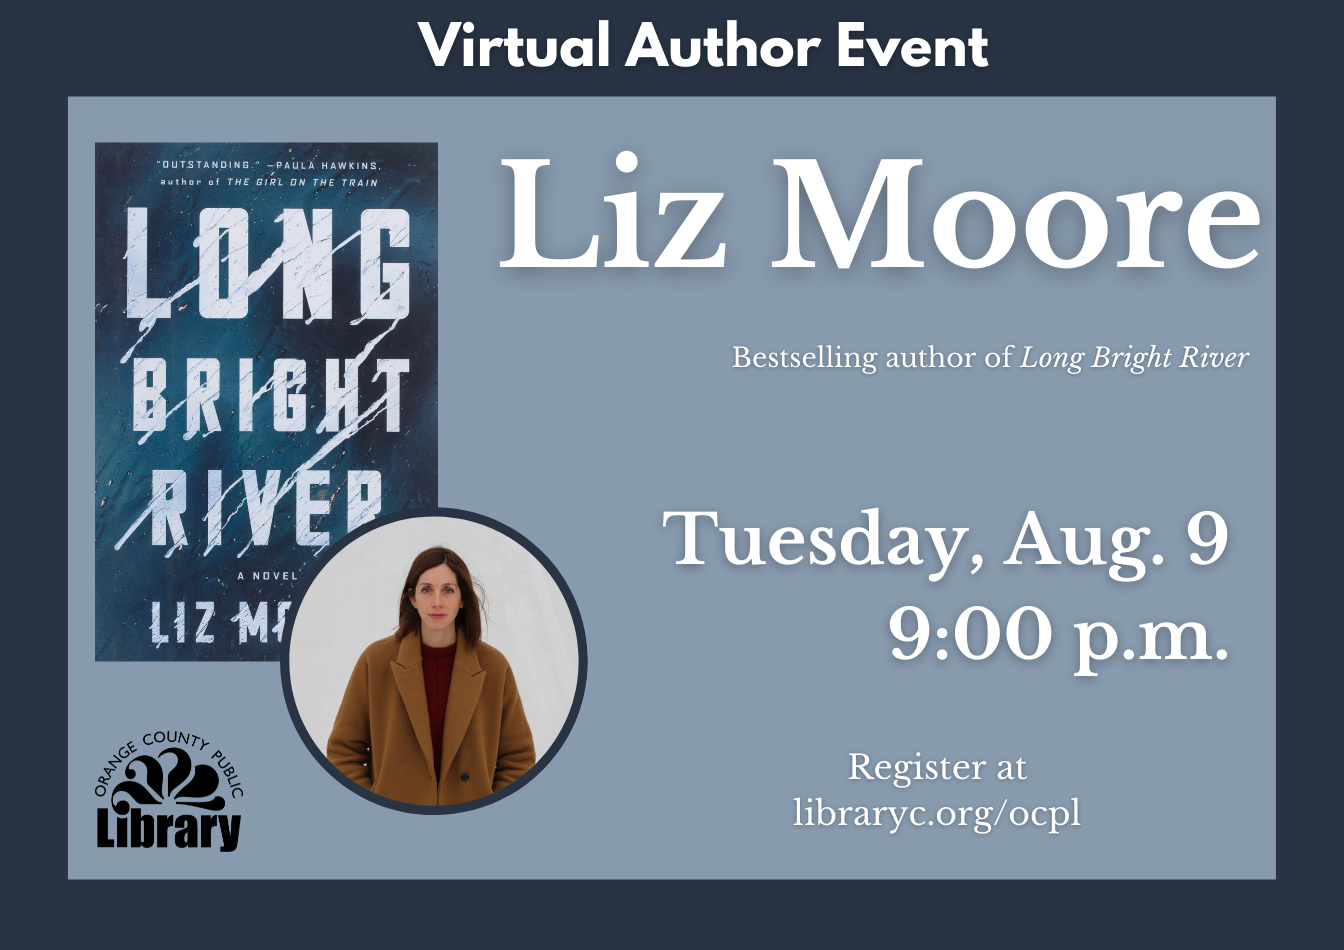 A widget advertising a virtual author event with Liz Moore.